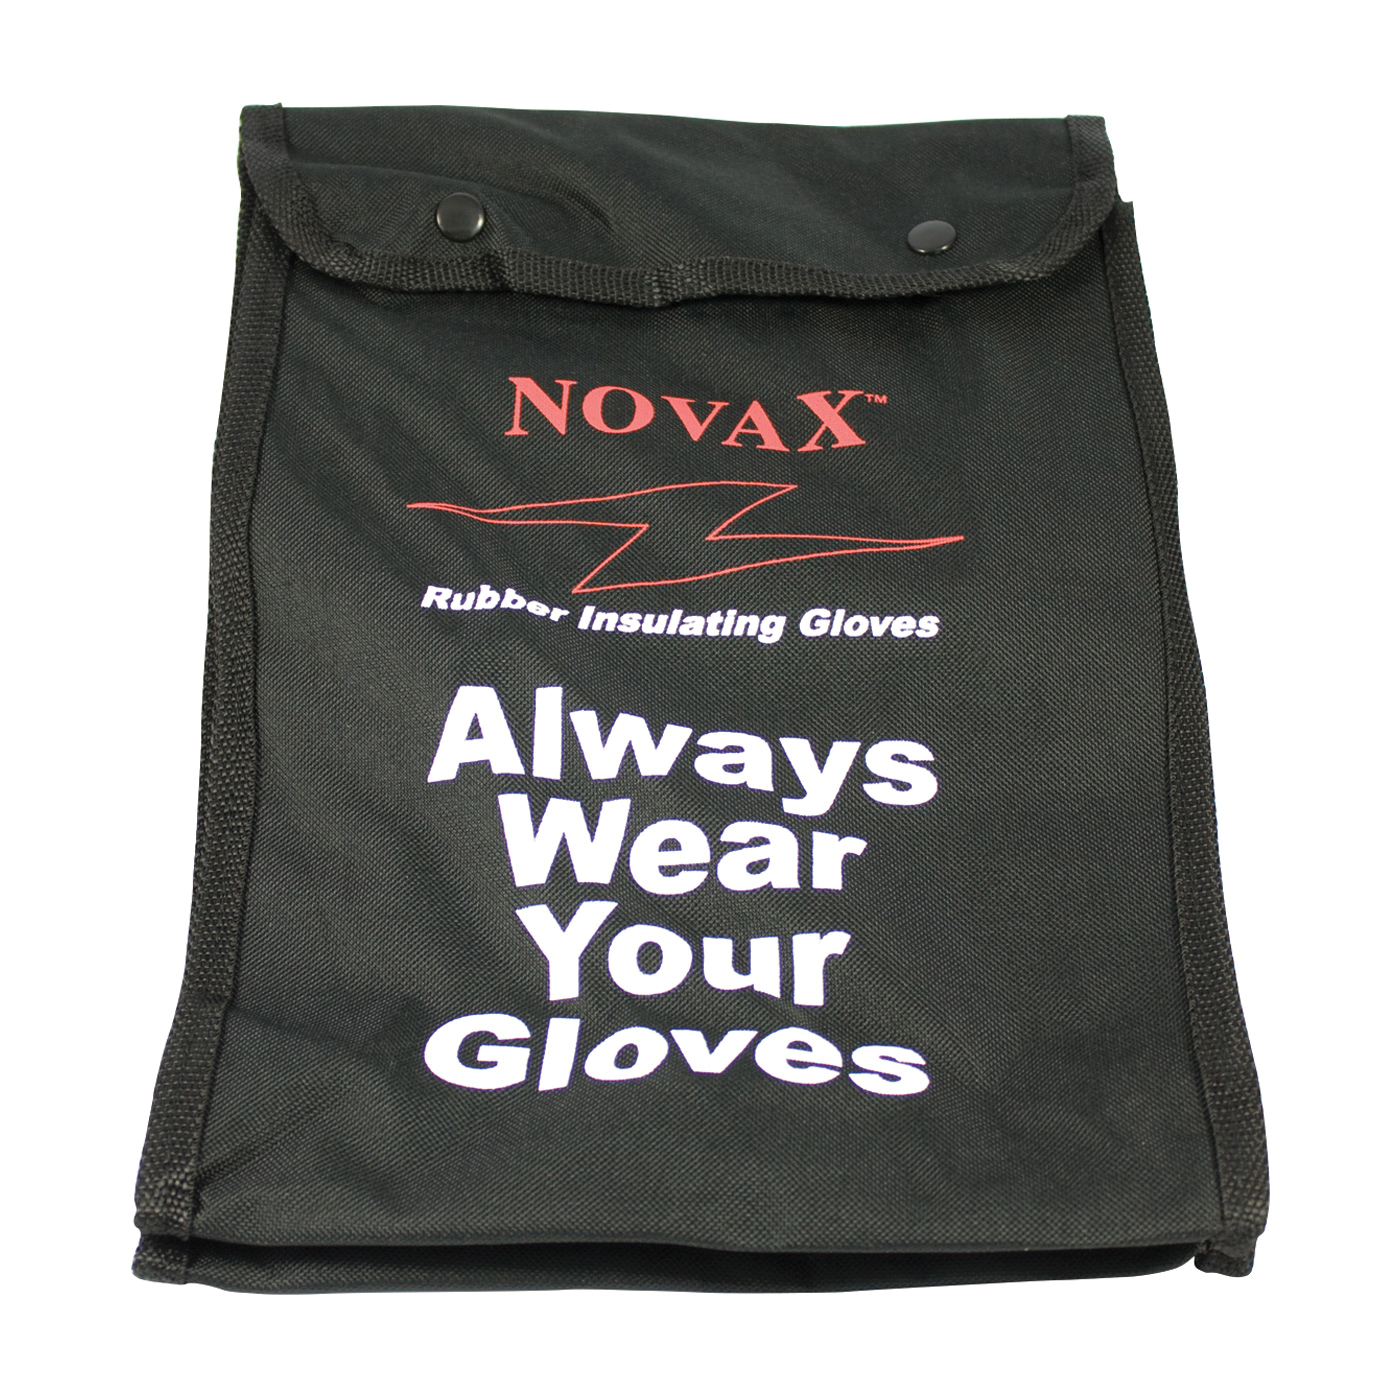 Novax® 148-2136 Protective Bag, Plastic Hook, Snap Closure, For Use With Novax Rubber Insulating Gloves, Nylon, Black with Red/White Lettering